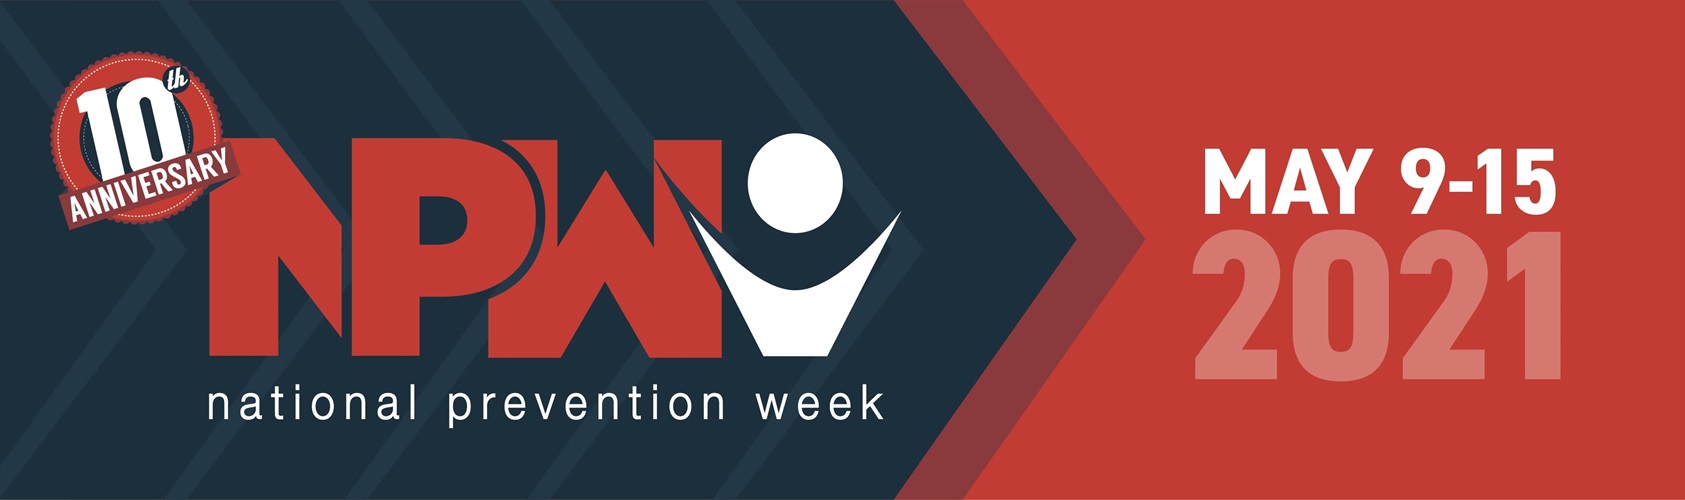 Banner graphic says "10th Anniversary National Prevention Week May 9-15, 2021"